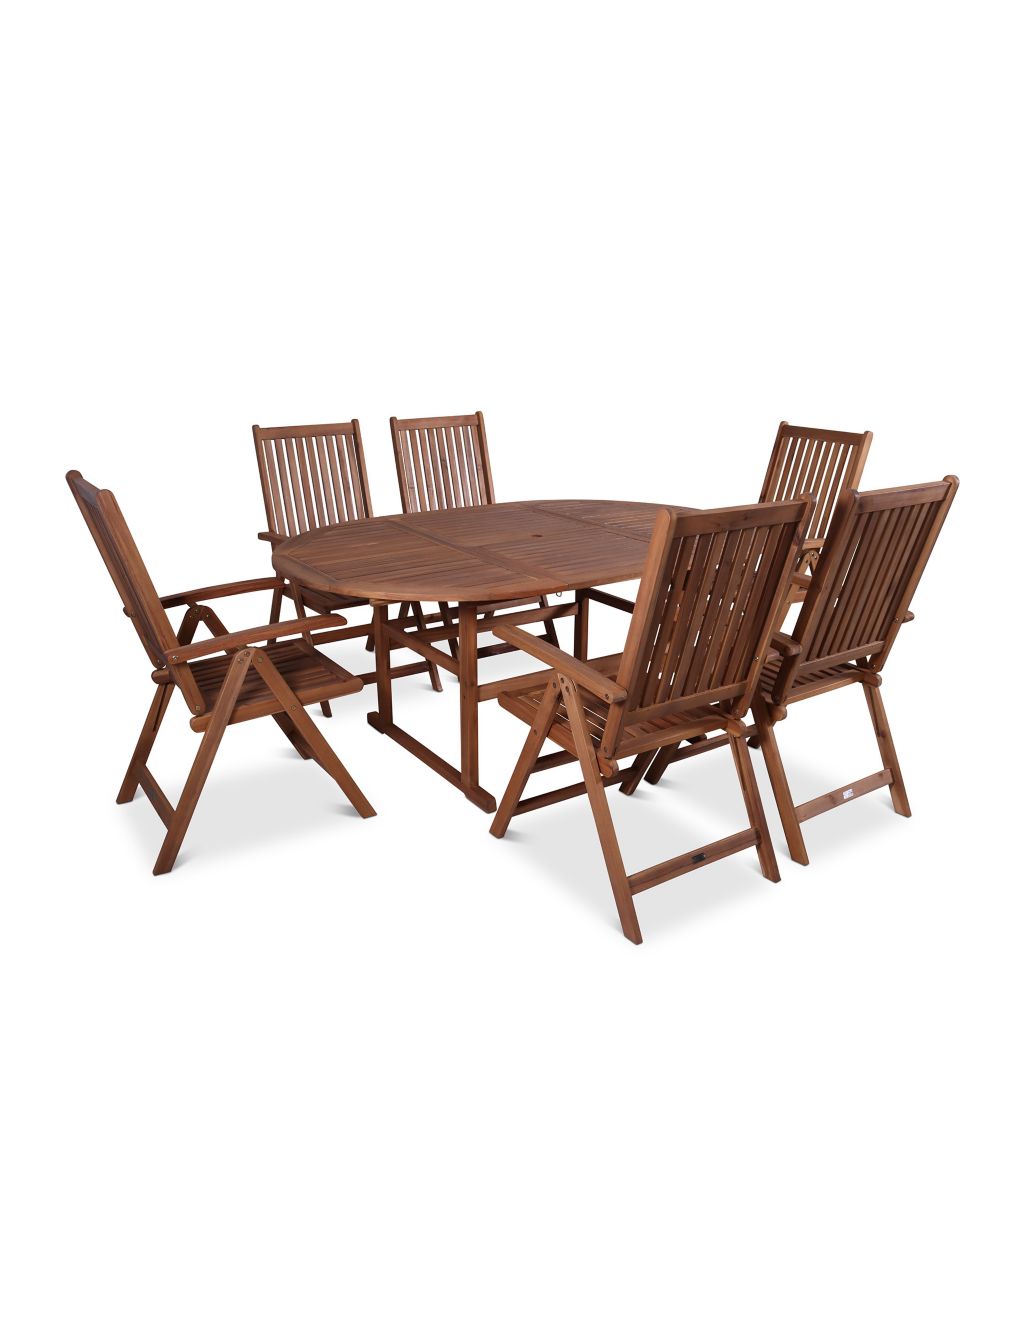 Turnbury 6 Seater Garden Table & Chairs 2 of 3